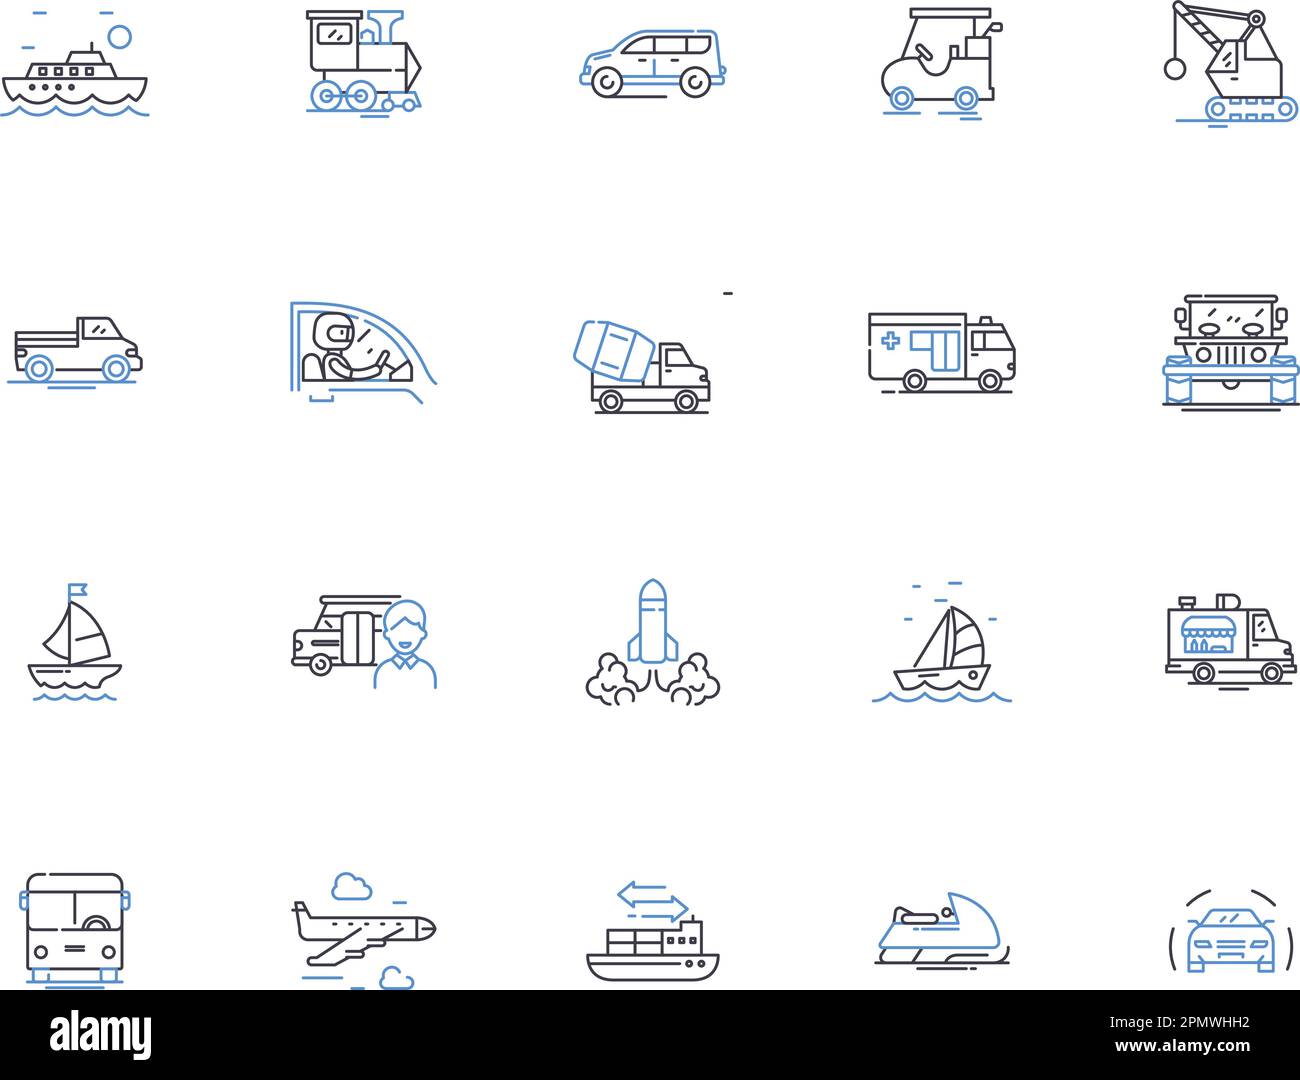 Transport set outline icons collection. Transport, Set, Vehicles, Travel, Haulage, Logistics, Wheels vector and illustration concept set. Cargo Stock Vector